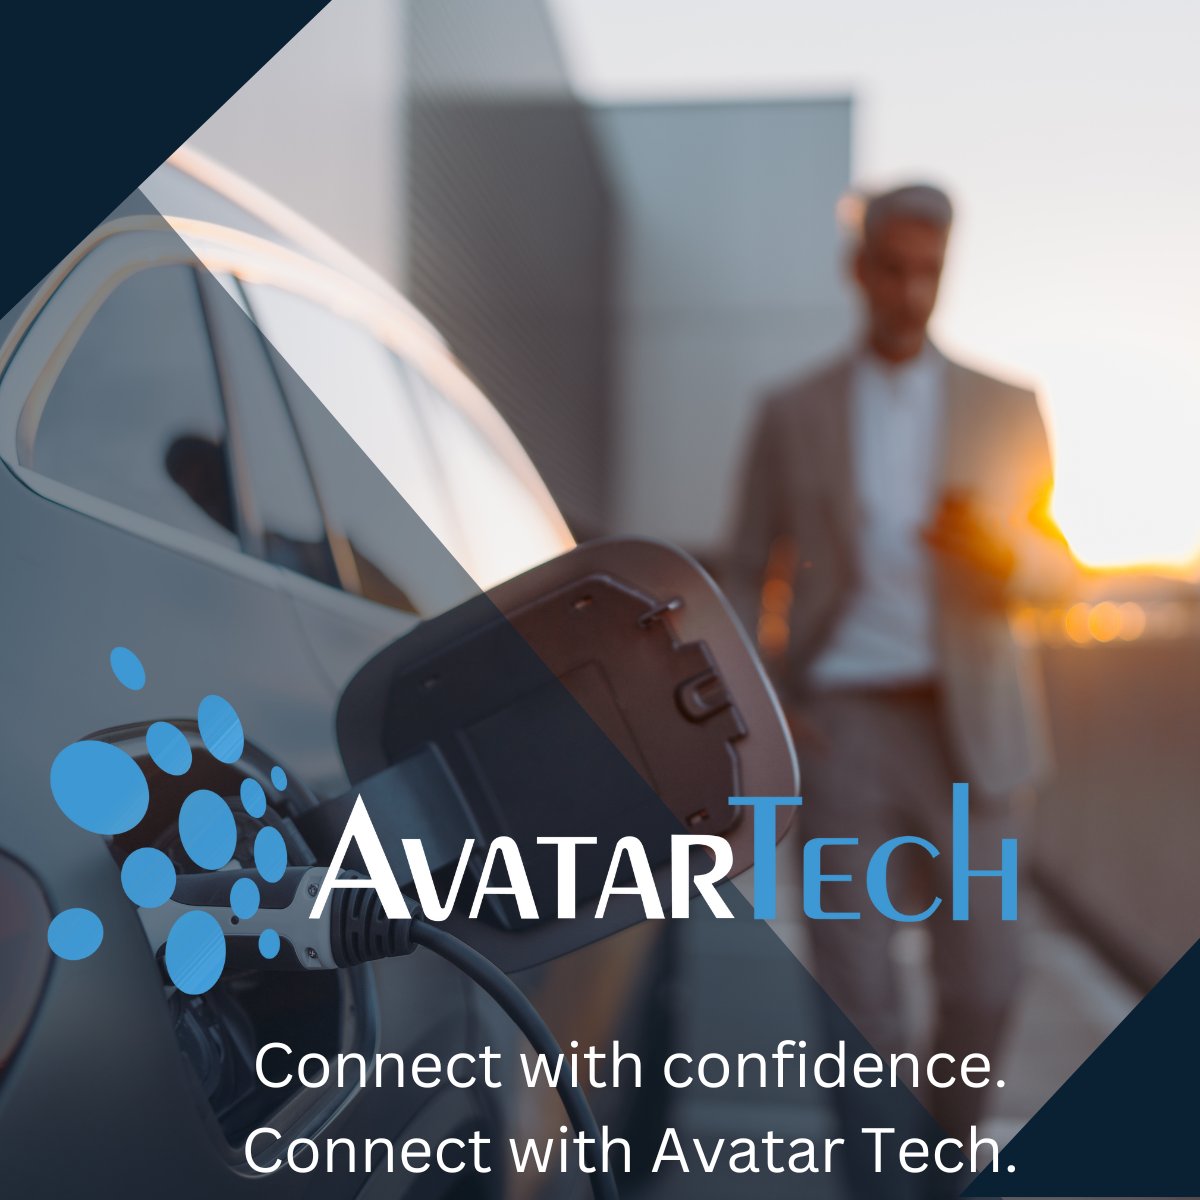 Charge up responsibly! Avatar Tech is committed to powering your journey with clean energy.

🌱🔌 #SustainableTravel

#AvatarTech #AvatarTechFiberInternet #AvatarTechAdvantage #TechAssessmentExperts #broadbandforall #broadband #fiberinternet

#capacityplanning